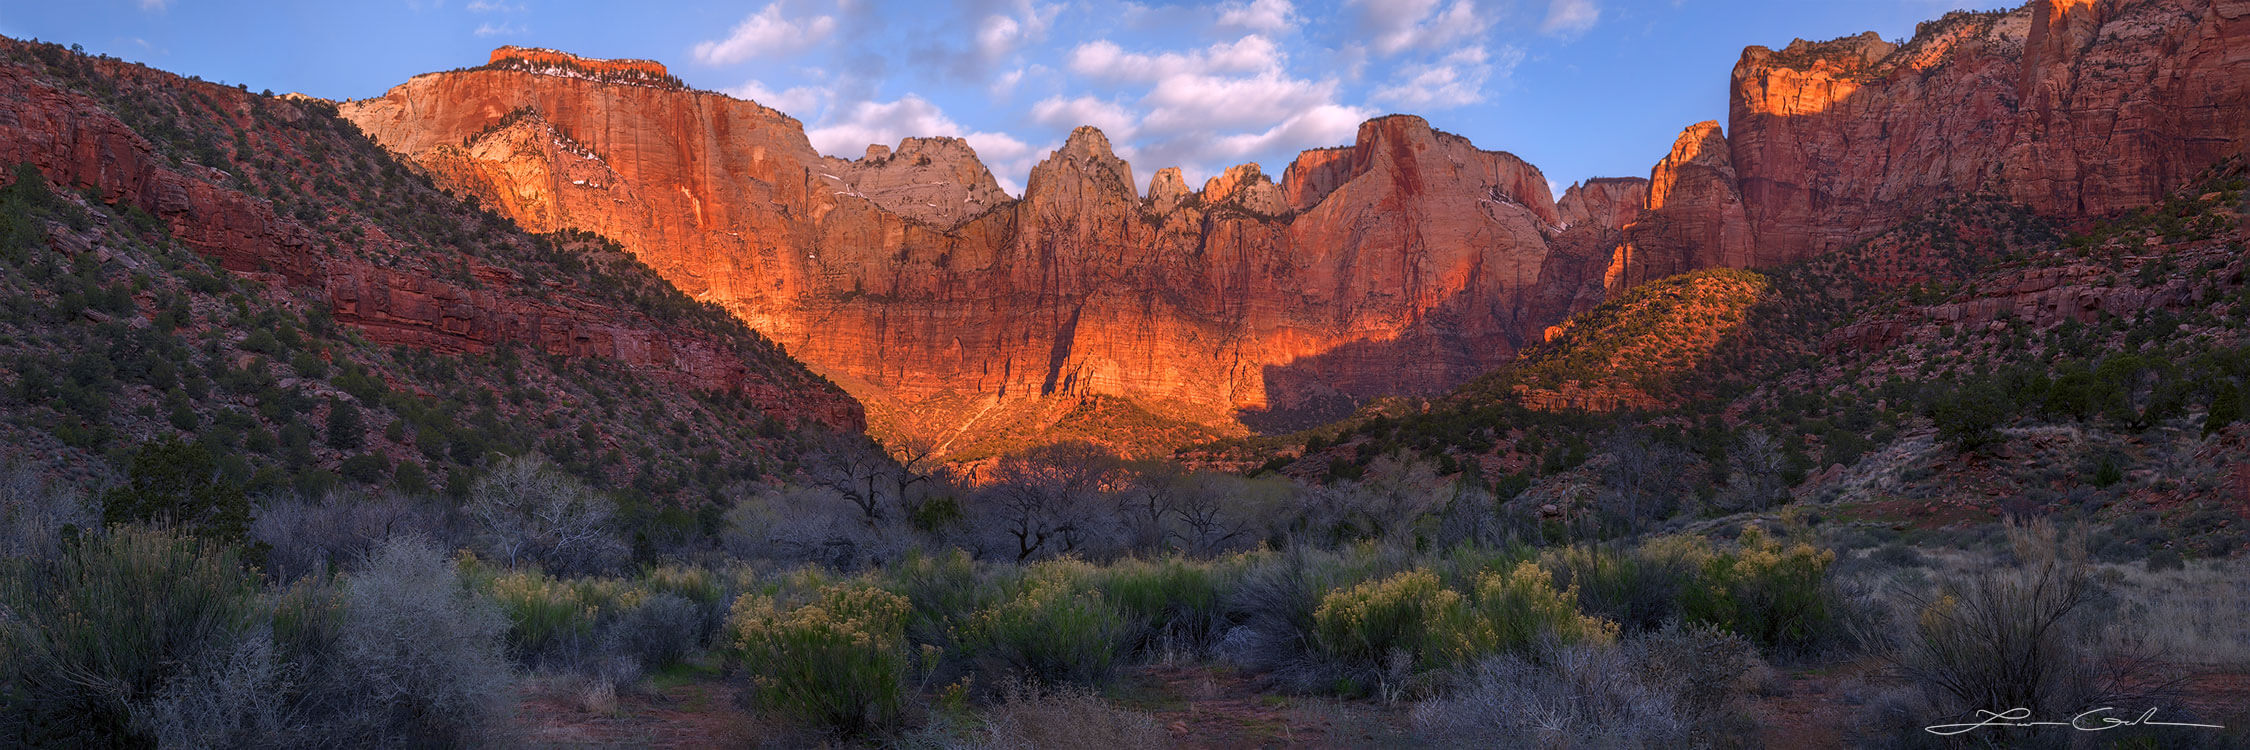 Beautiful red mountains with a stripe of sun light across and a desert valley with trees and shrubs, Zion National Park